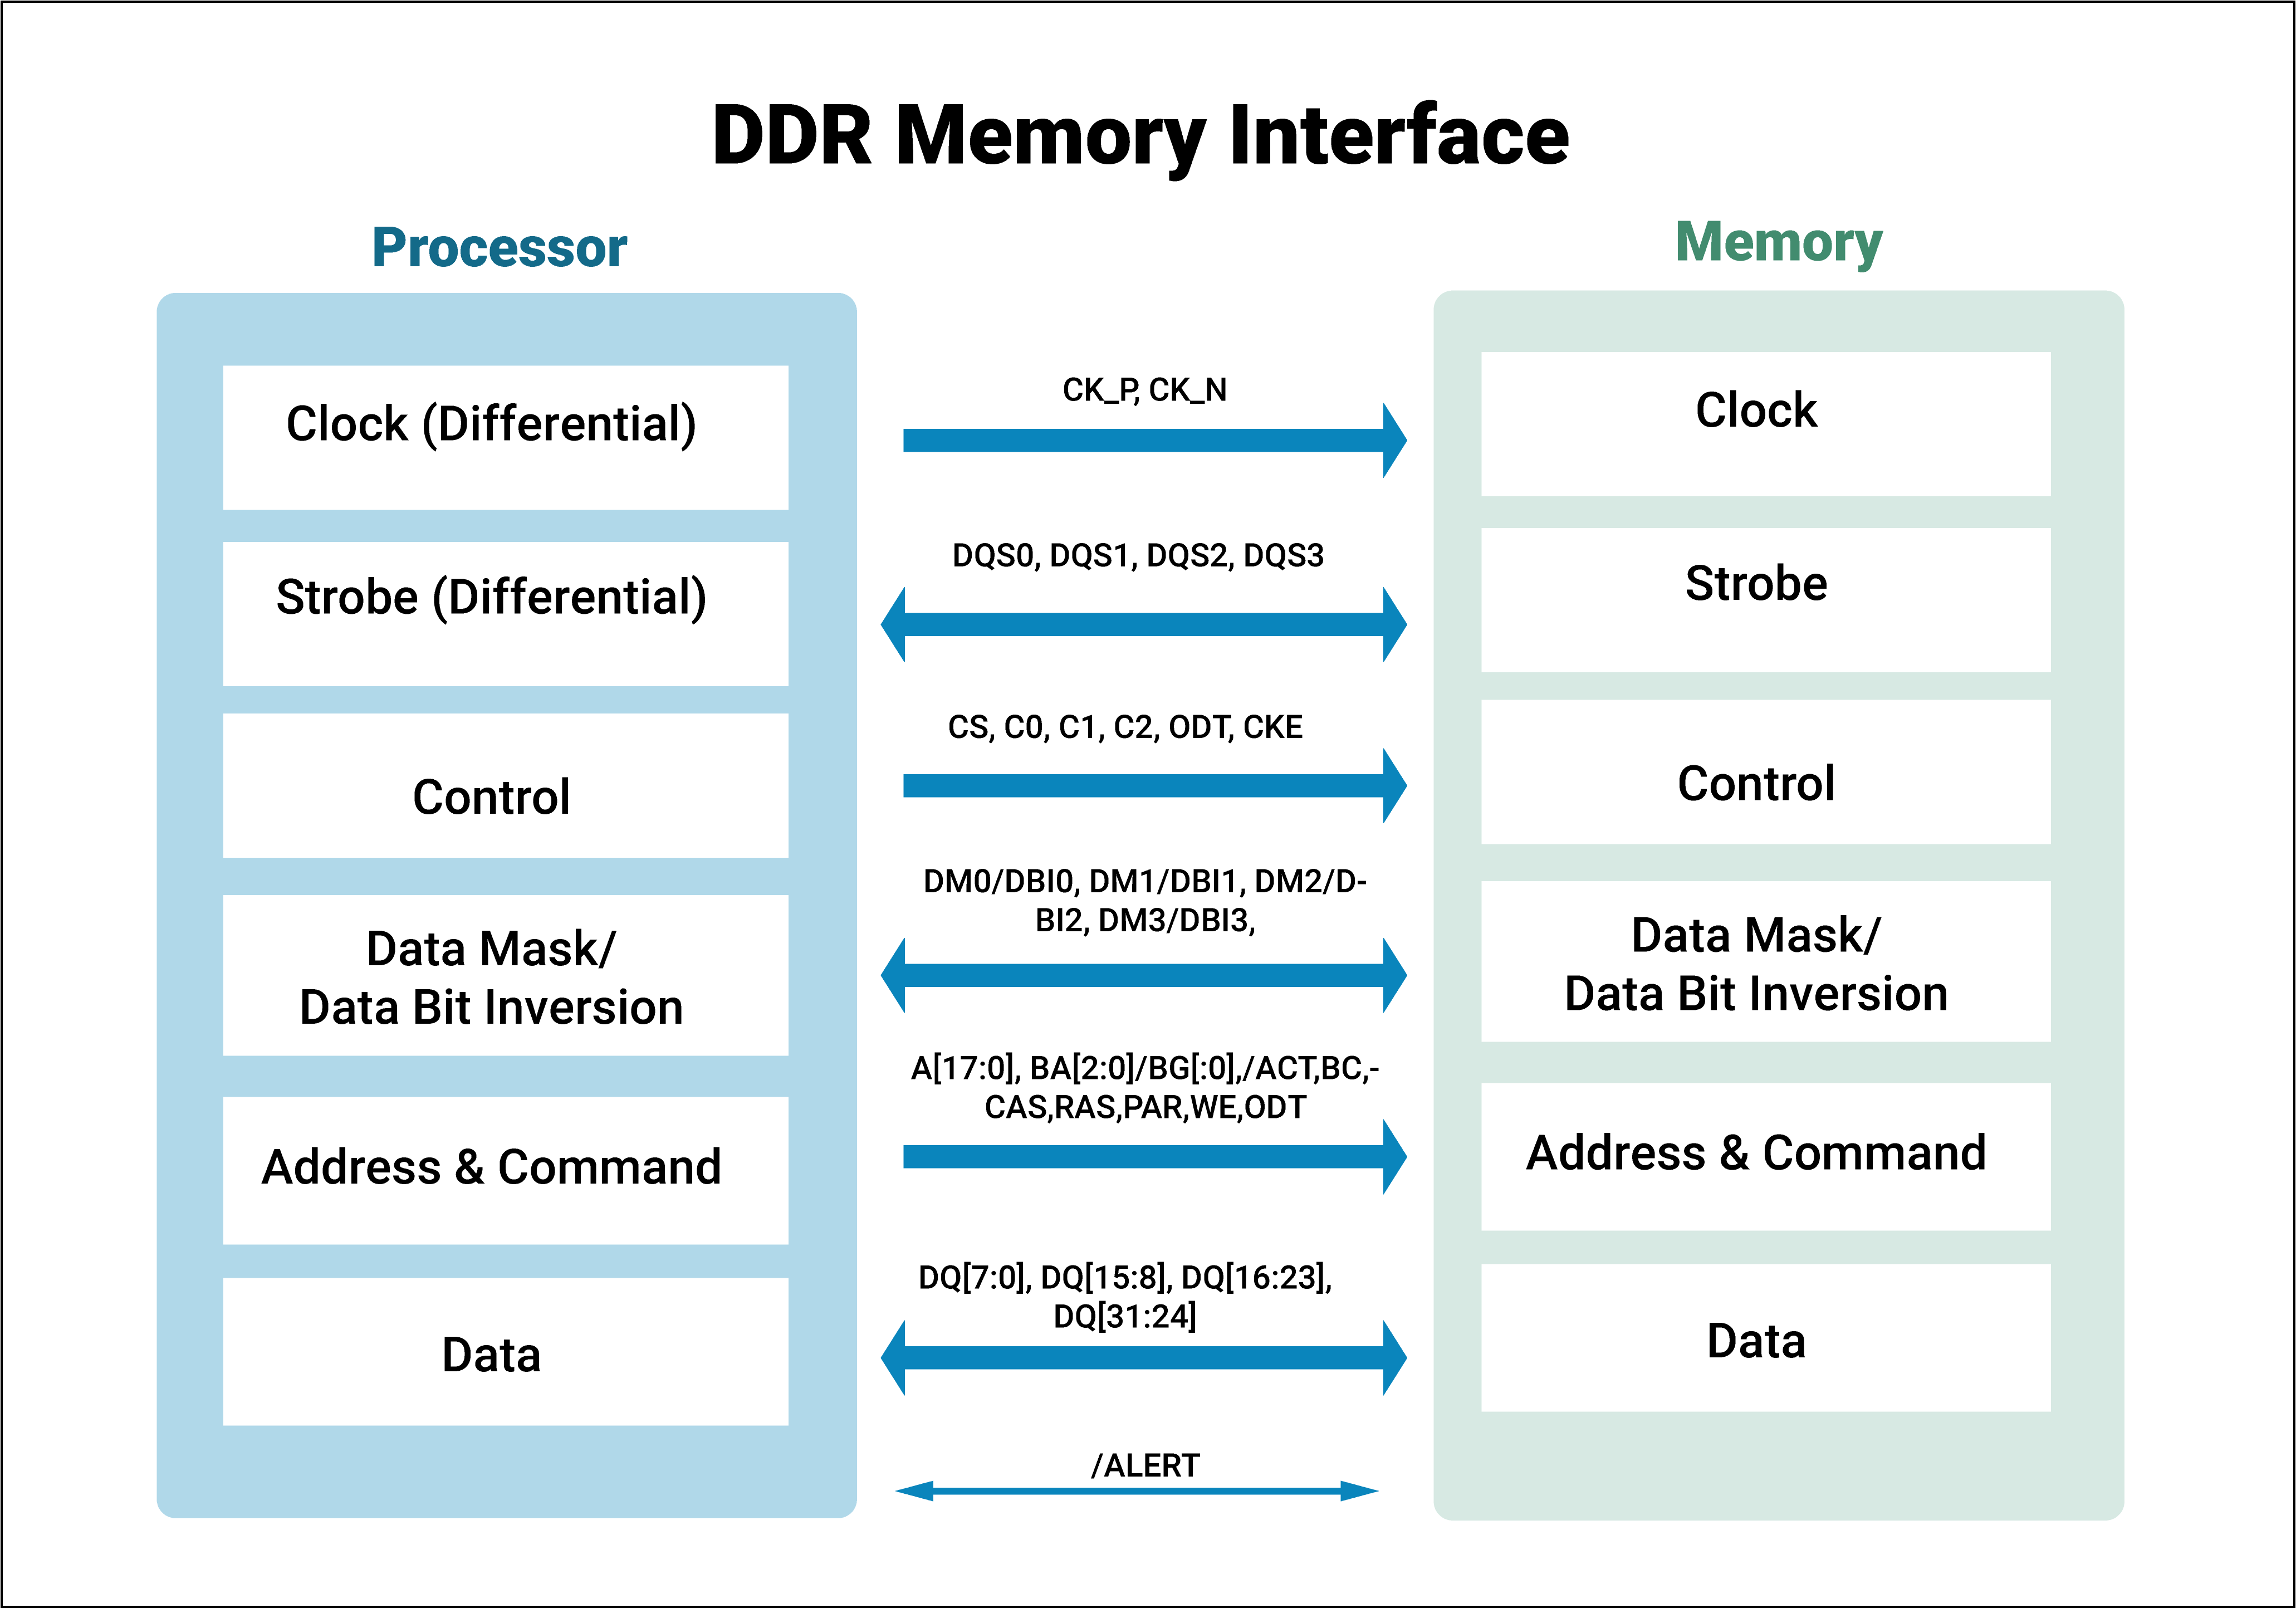 DDR memory and processor interface